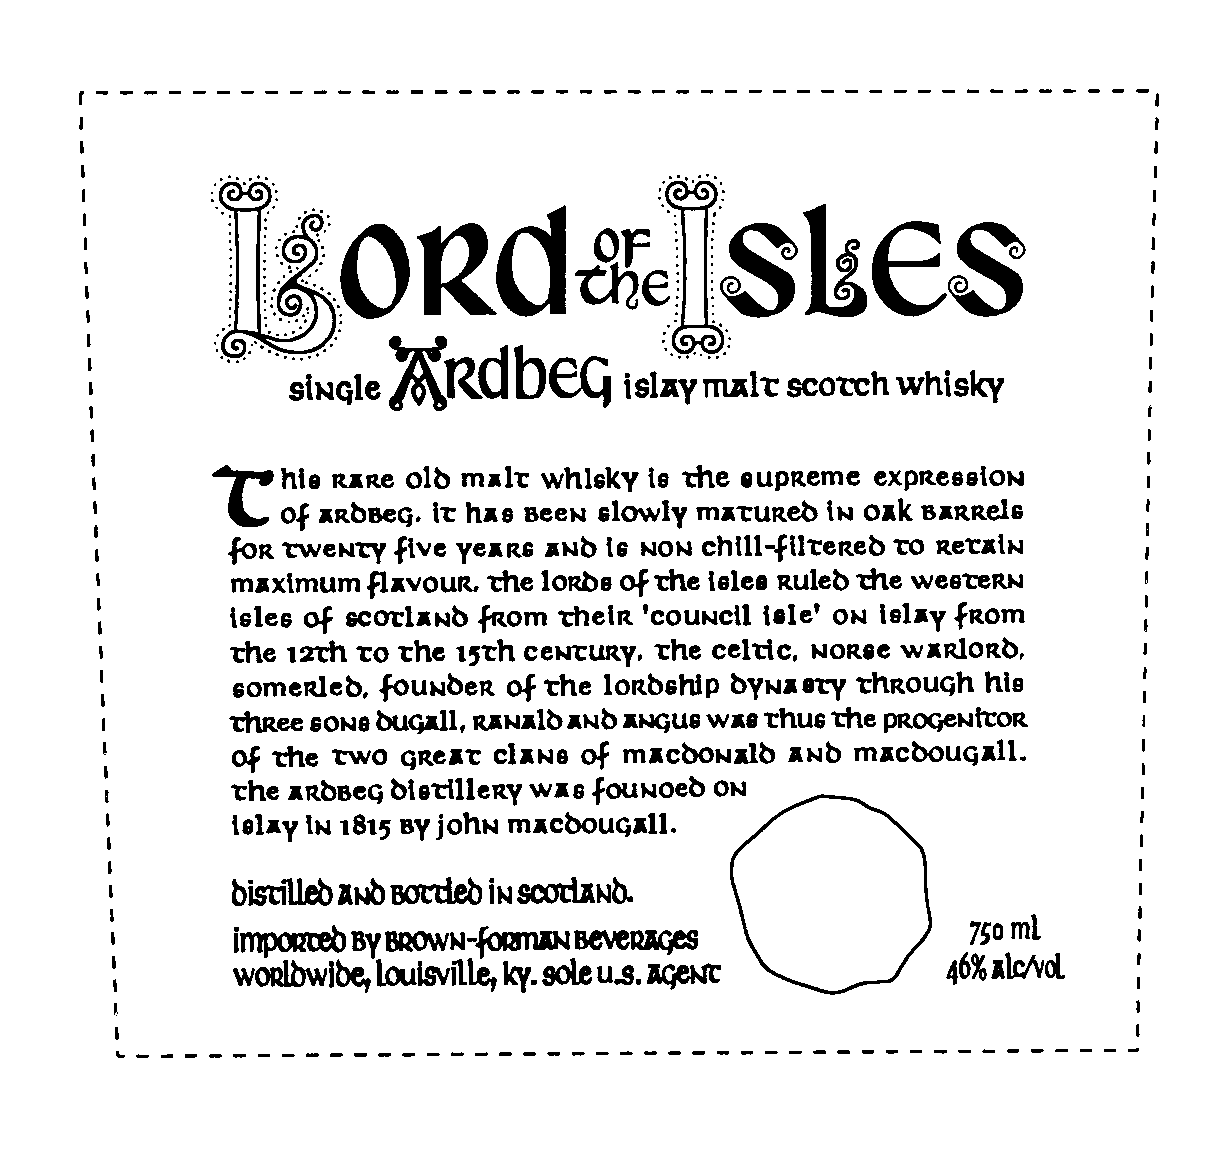 Trademark Logo LORD OF THE ISLES SINGLE ARDBEG ISLAY MALT SCOTCH WHISKY THIS RARE OLD MALT WHISKY IS THE SUPREME EXPRESSION OF ARDBEG, IT HAS BEEN SLOWLY MATURED IN OAK BARRELS FOR TWENTY FIVE YEARS AND IS NON CHILL-FILTERED TO RETAIN MAXIMUM FLAVOUR, THE LORDS OF THE ISLES RULED THE WESTERN ISLES OF SCOTLAND FROM THEIR 'COUNCIL ISLE' ON ISLAY FROM THE 12TH TO THE 15TH CENTURY, THE CELTIC, NORSE WARLORD, SOMERLED, FOUNDER OF THE LORDSHIP DYNASTY THROUGH HIS THREE SONS DUGALL, RANALD AND ANGUS WAS THUS THE PROGENICOR OF THE TWO GREAT CLANS OF MACDONALD AND MACDOUGALL. THE ARDBEG DISTILLERY WAS FOUNOED ON ISLAY IN 1815 BY JOHN MACDOUGALL. DISTILLED AND BOTTLED IN SCOTLAND. IMPORTED BY BROWN-FORMAN BEVERAGES WORLDWIDE, LOUISVILLE, KY. SOLE U.S. AGENT 750 ML 46% ALC/VOL